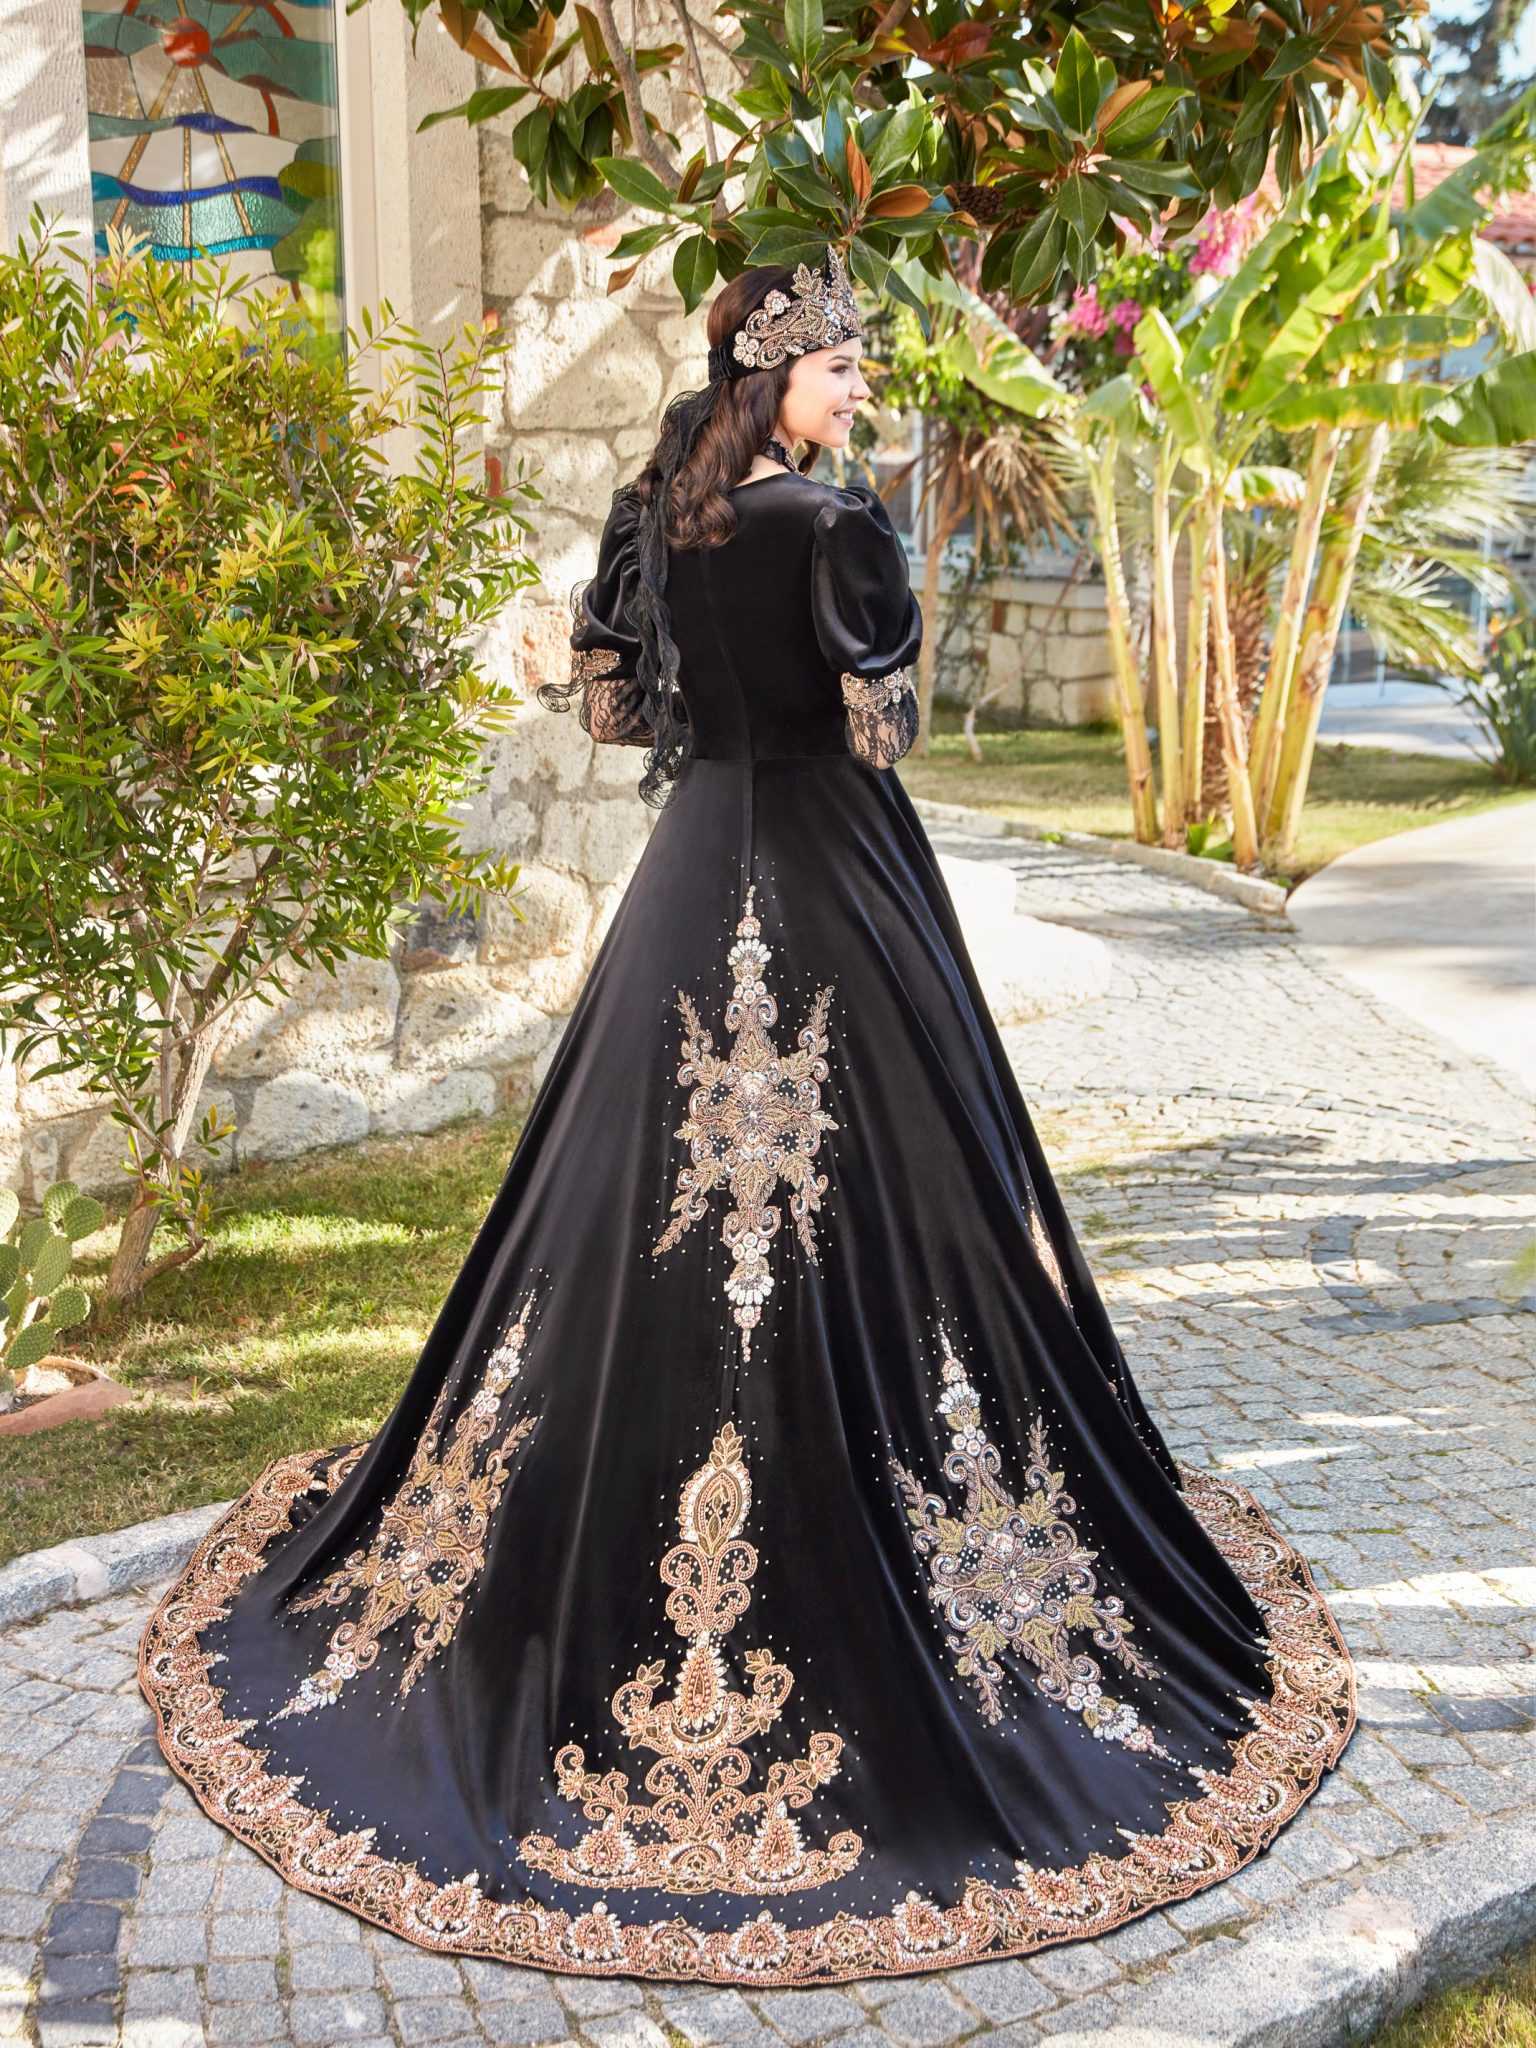 buy Black Long Juliet Sleeves Maxi Gold Lace Embellished With Sequin Work Henna Gown Dress 